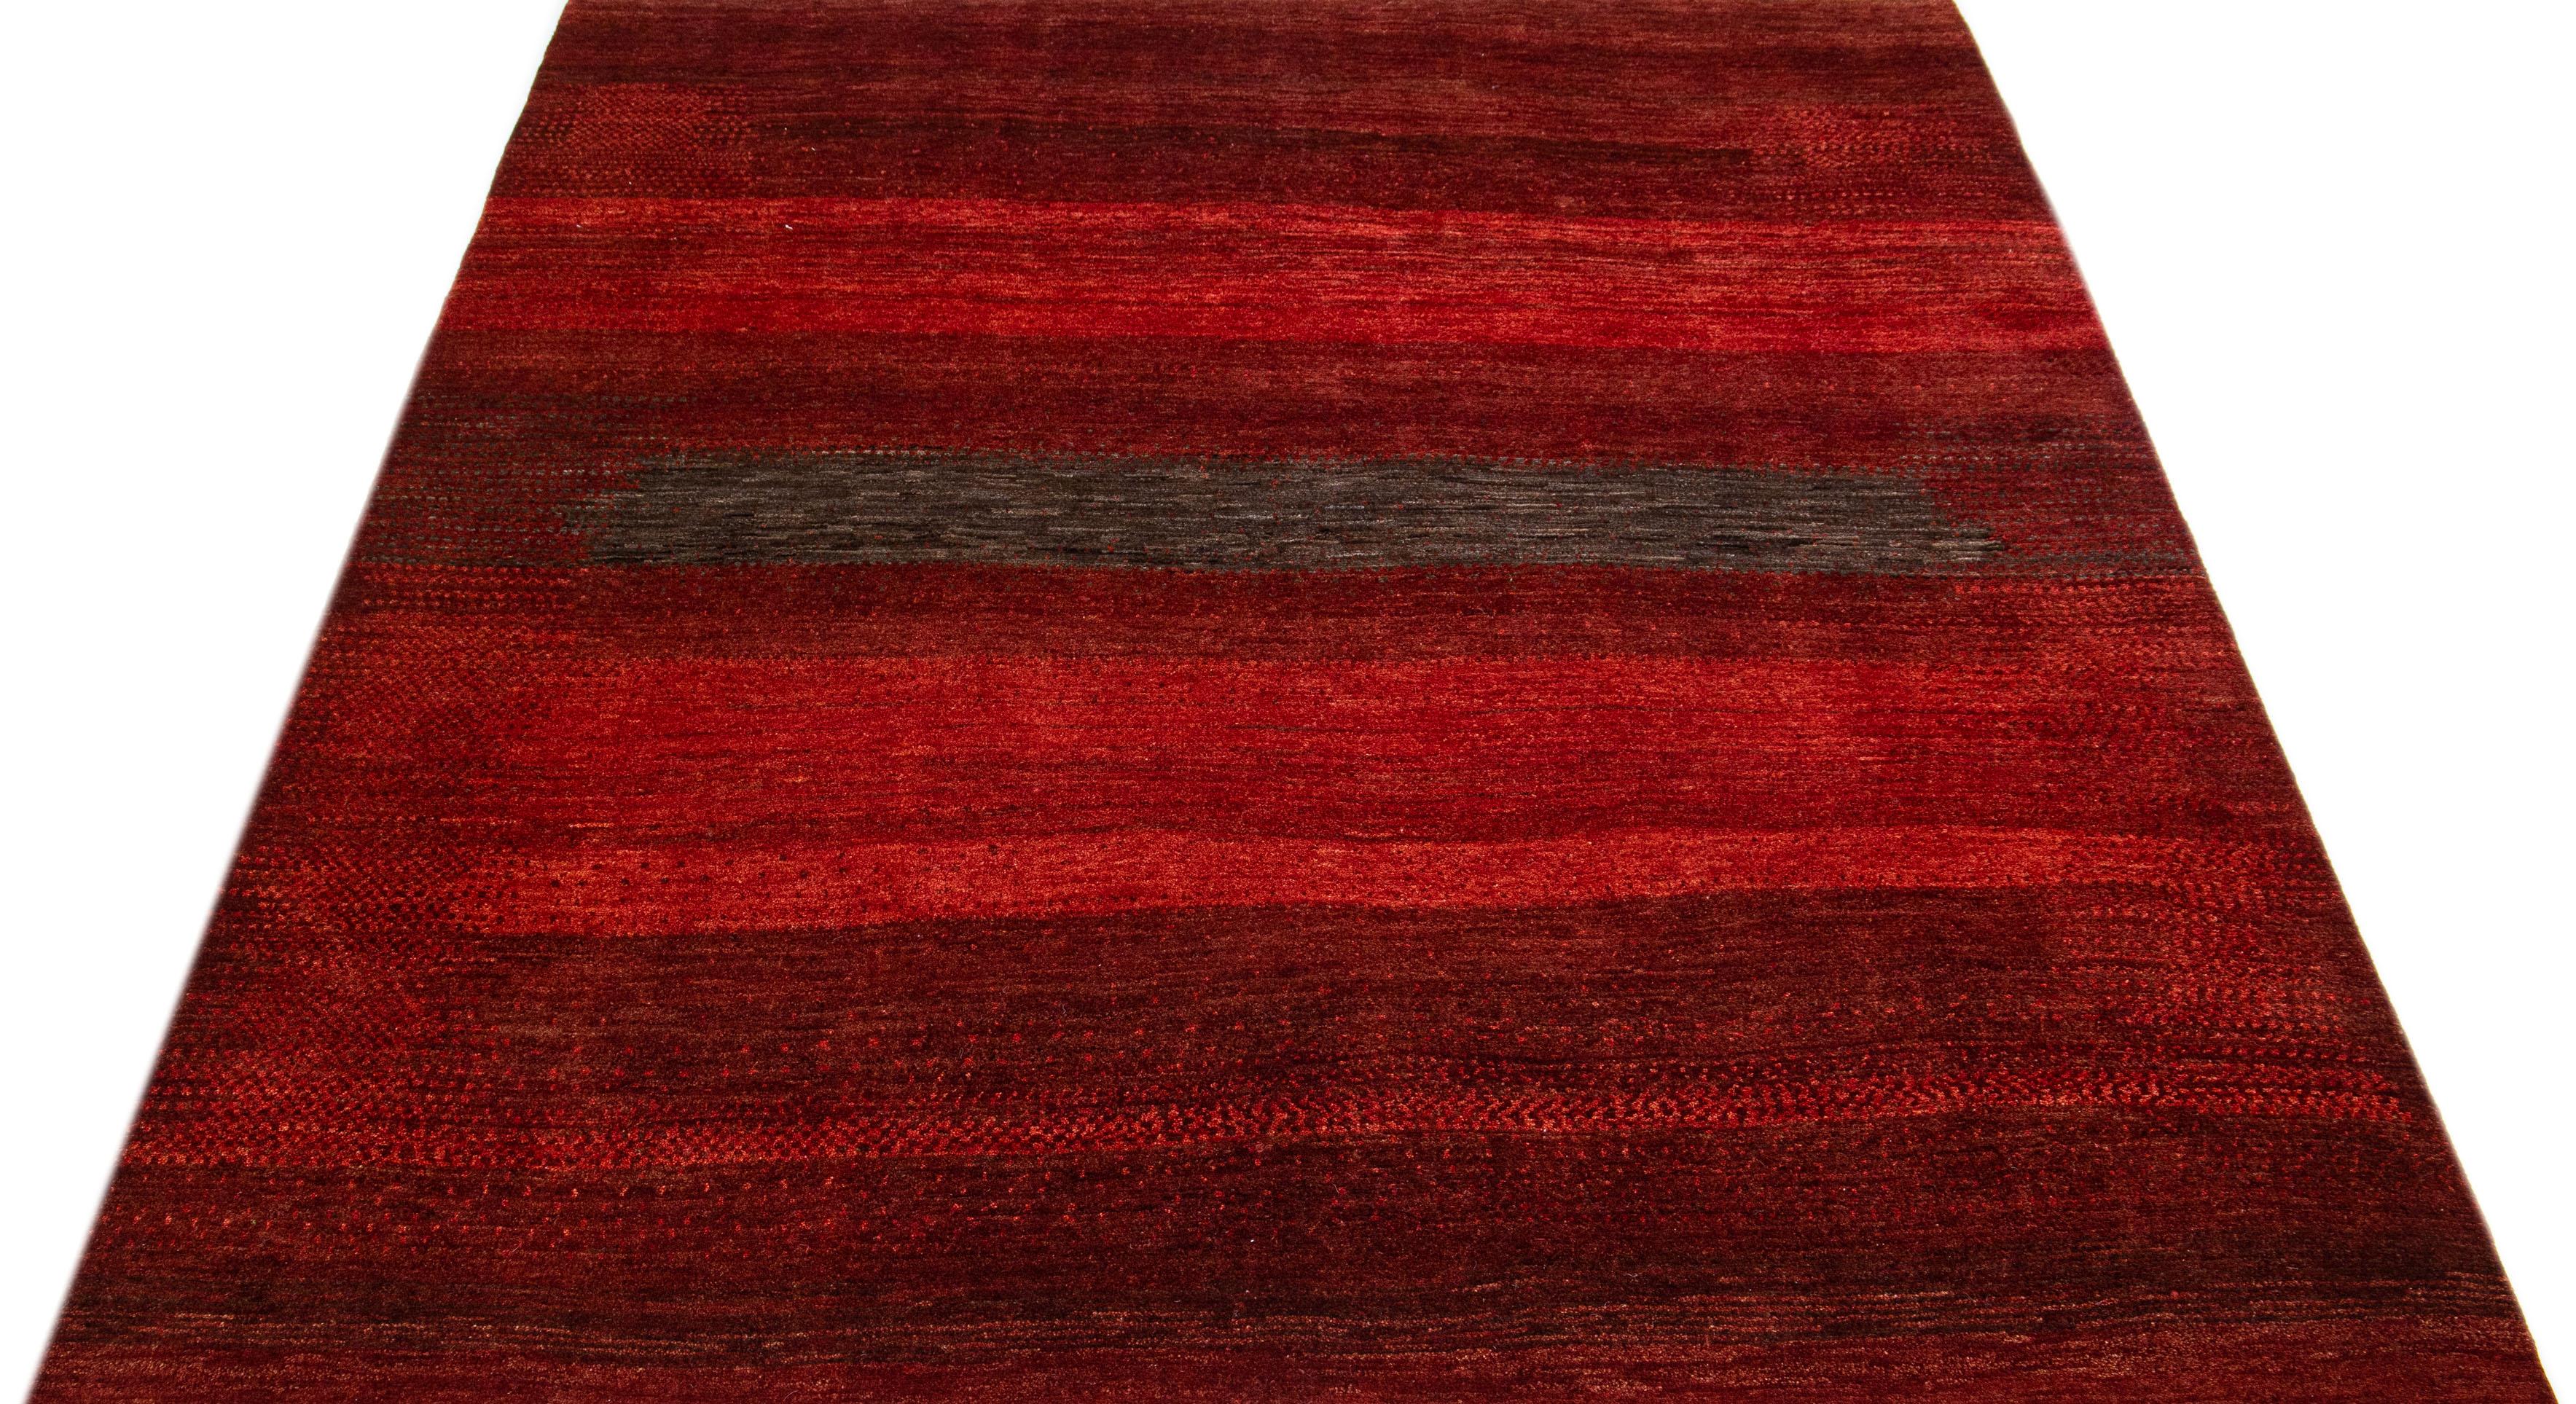 This woolen rug, crafted by hand in the style of Gabbeh, showcases an abstract aesthetic with brown accents against a vibrant red color field.

This rug measures 7'8